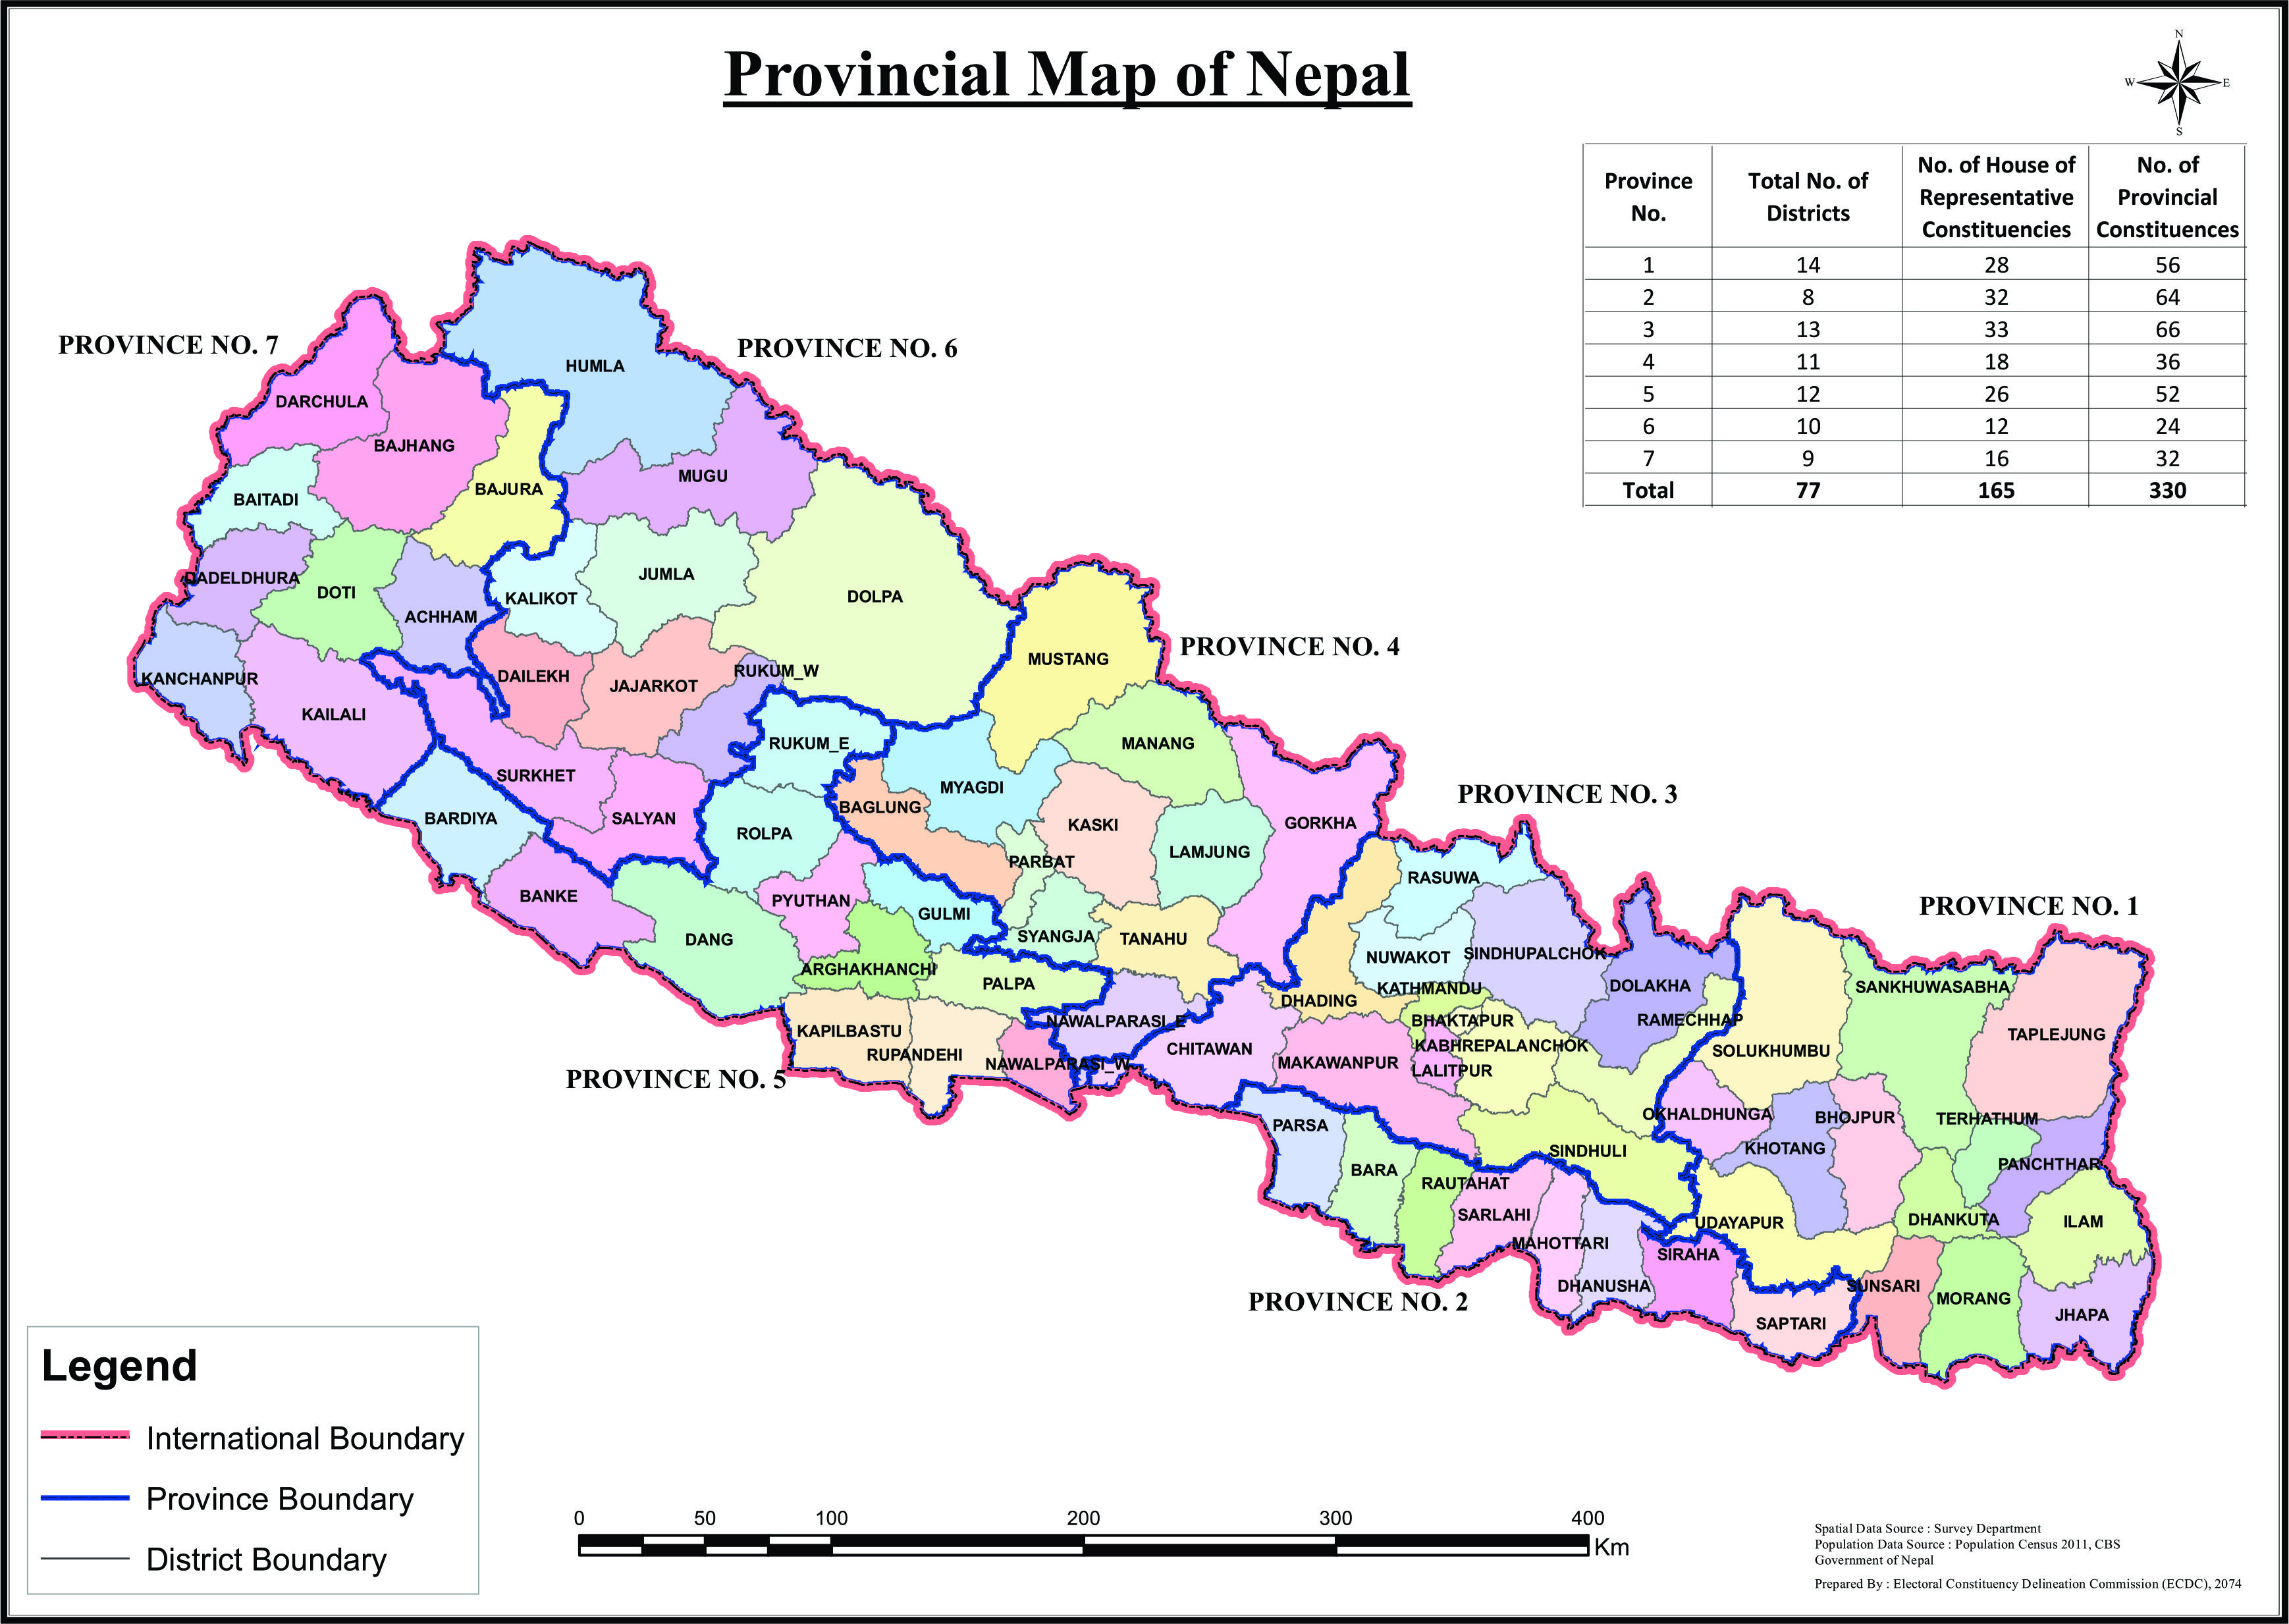 3. Provincial Map of Nepal